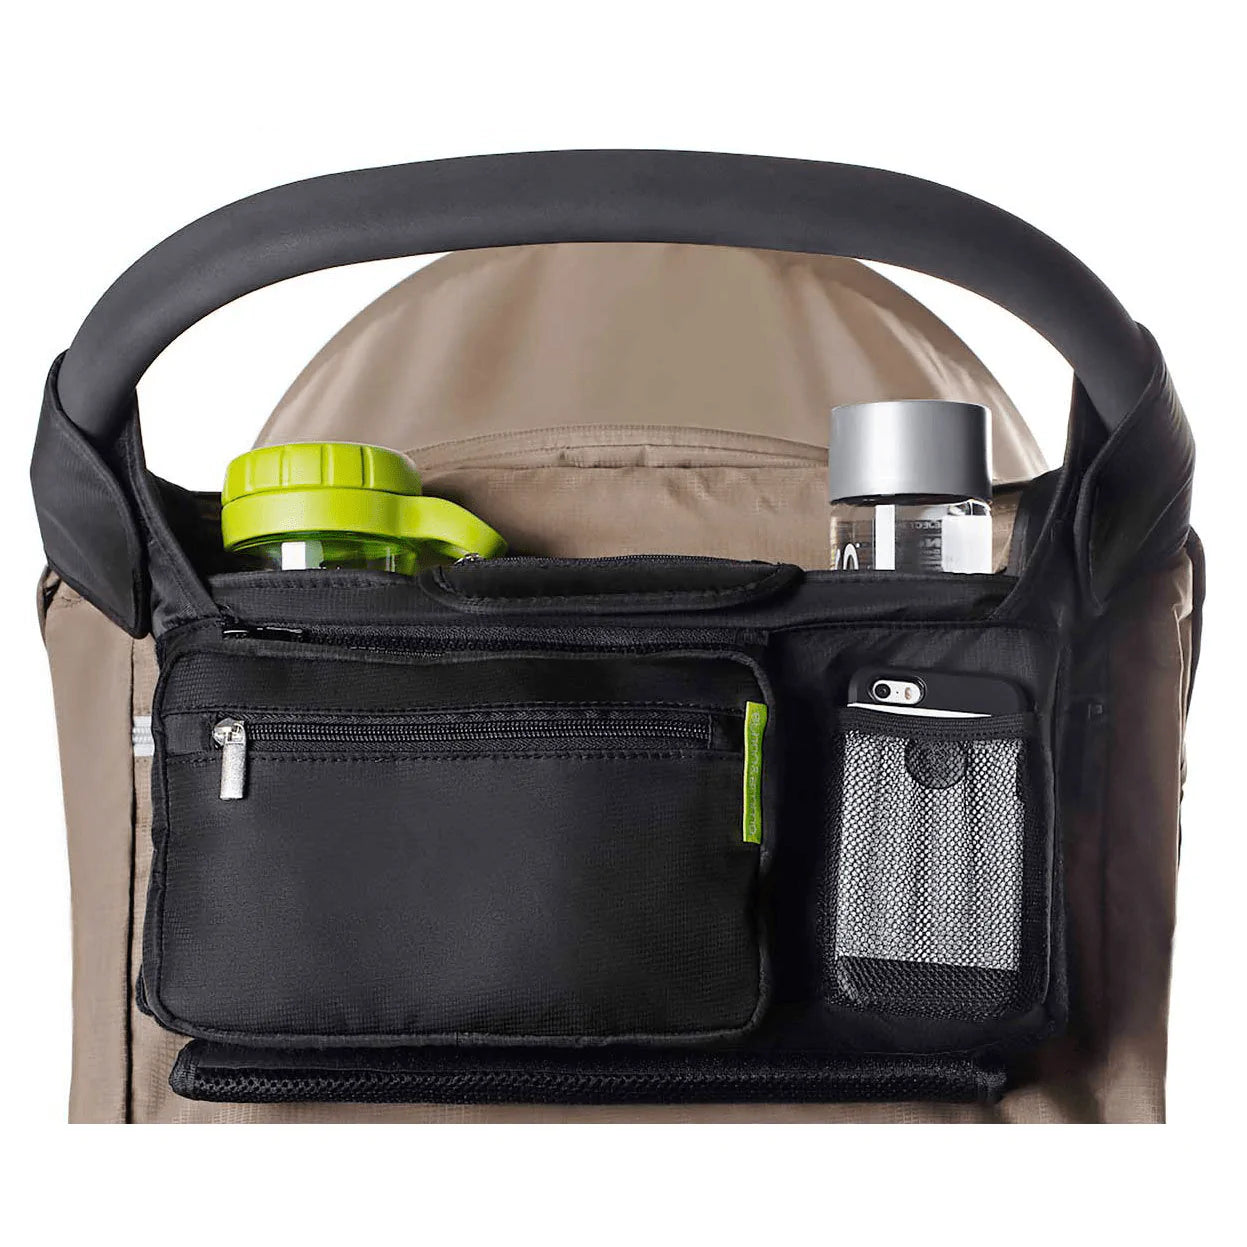 Ethan & Emma Universal Baby Stroller Organizer with Insulated Cup Holders for Smart Moms. Diaper Storage, Secure Straps, Detachable Bag, Pockets for Phone, Keys, Toys. Compact Design Fit All Strollers Animals & Pet Supplies > Pet Supplies > Dog Supplies > Dog Treadmills Ethan & Emma Black  